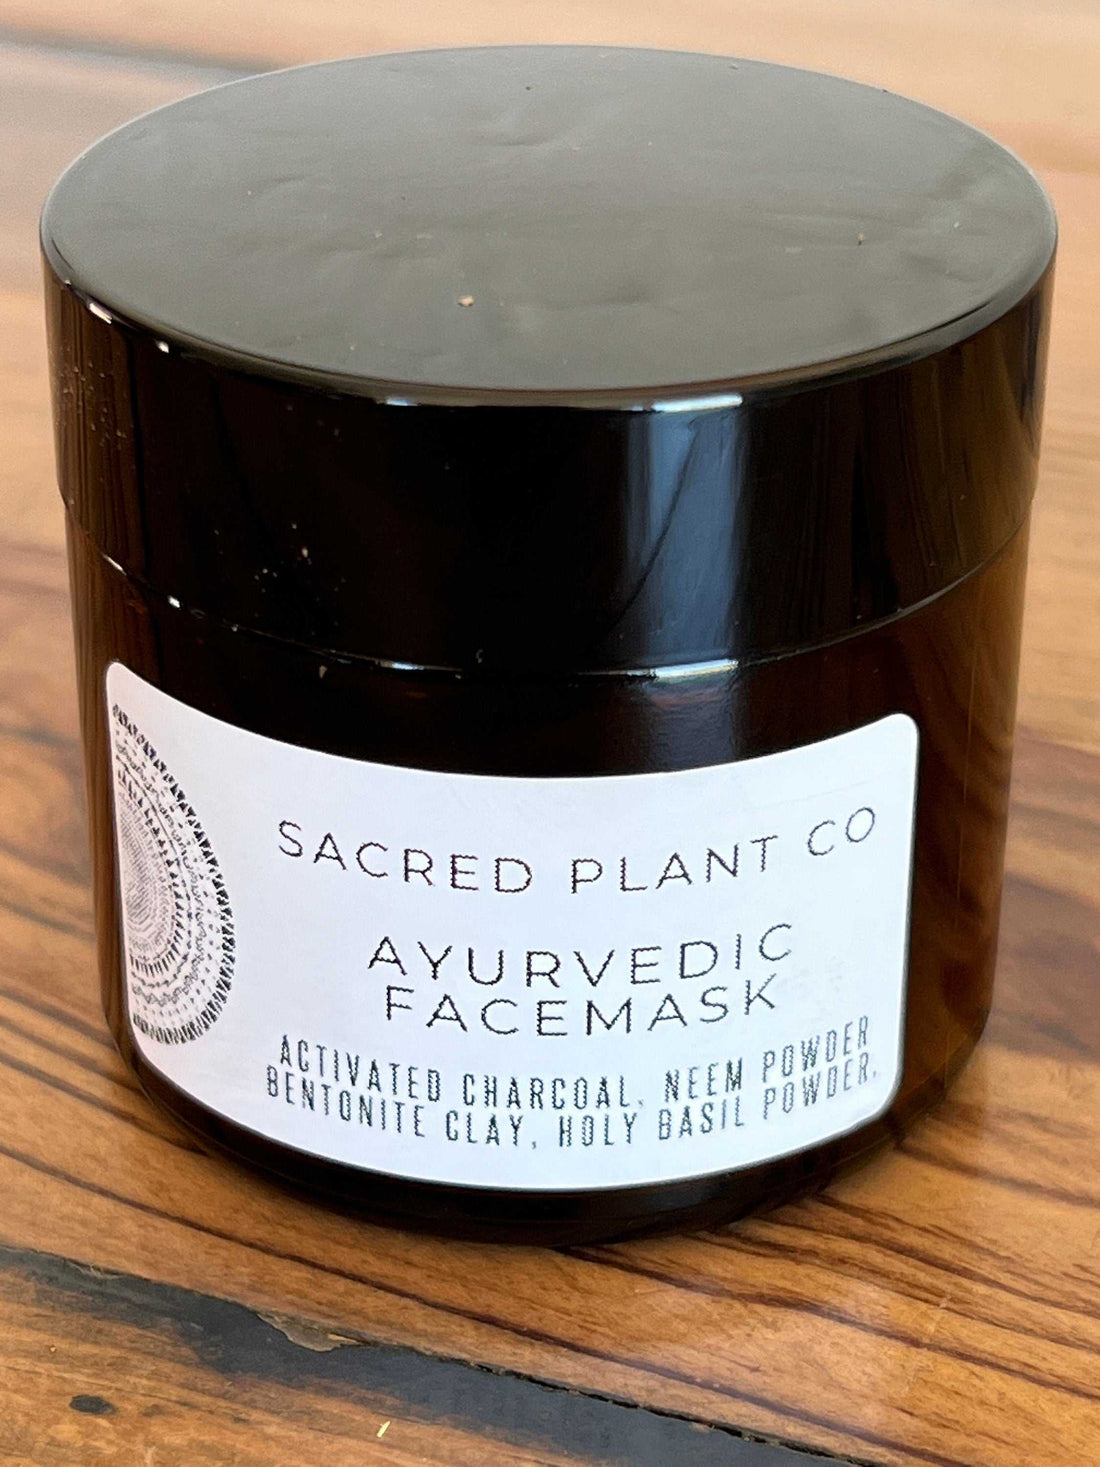 A close-up of Sacred Plant Co&